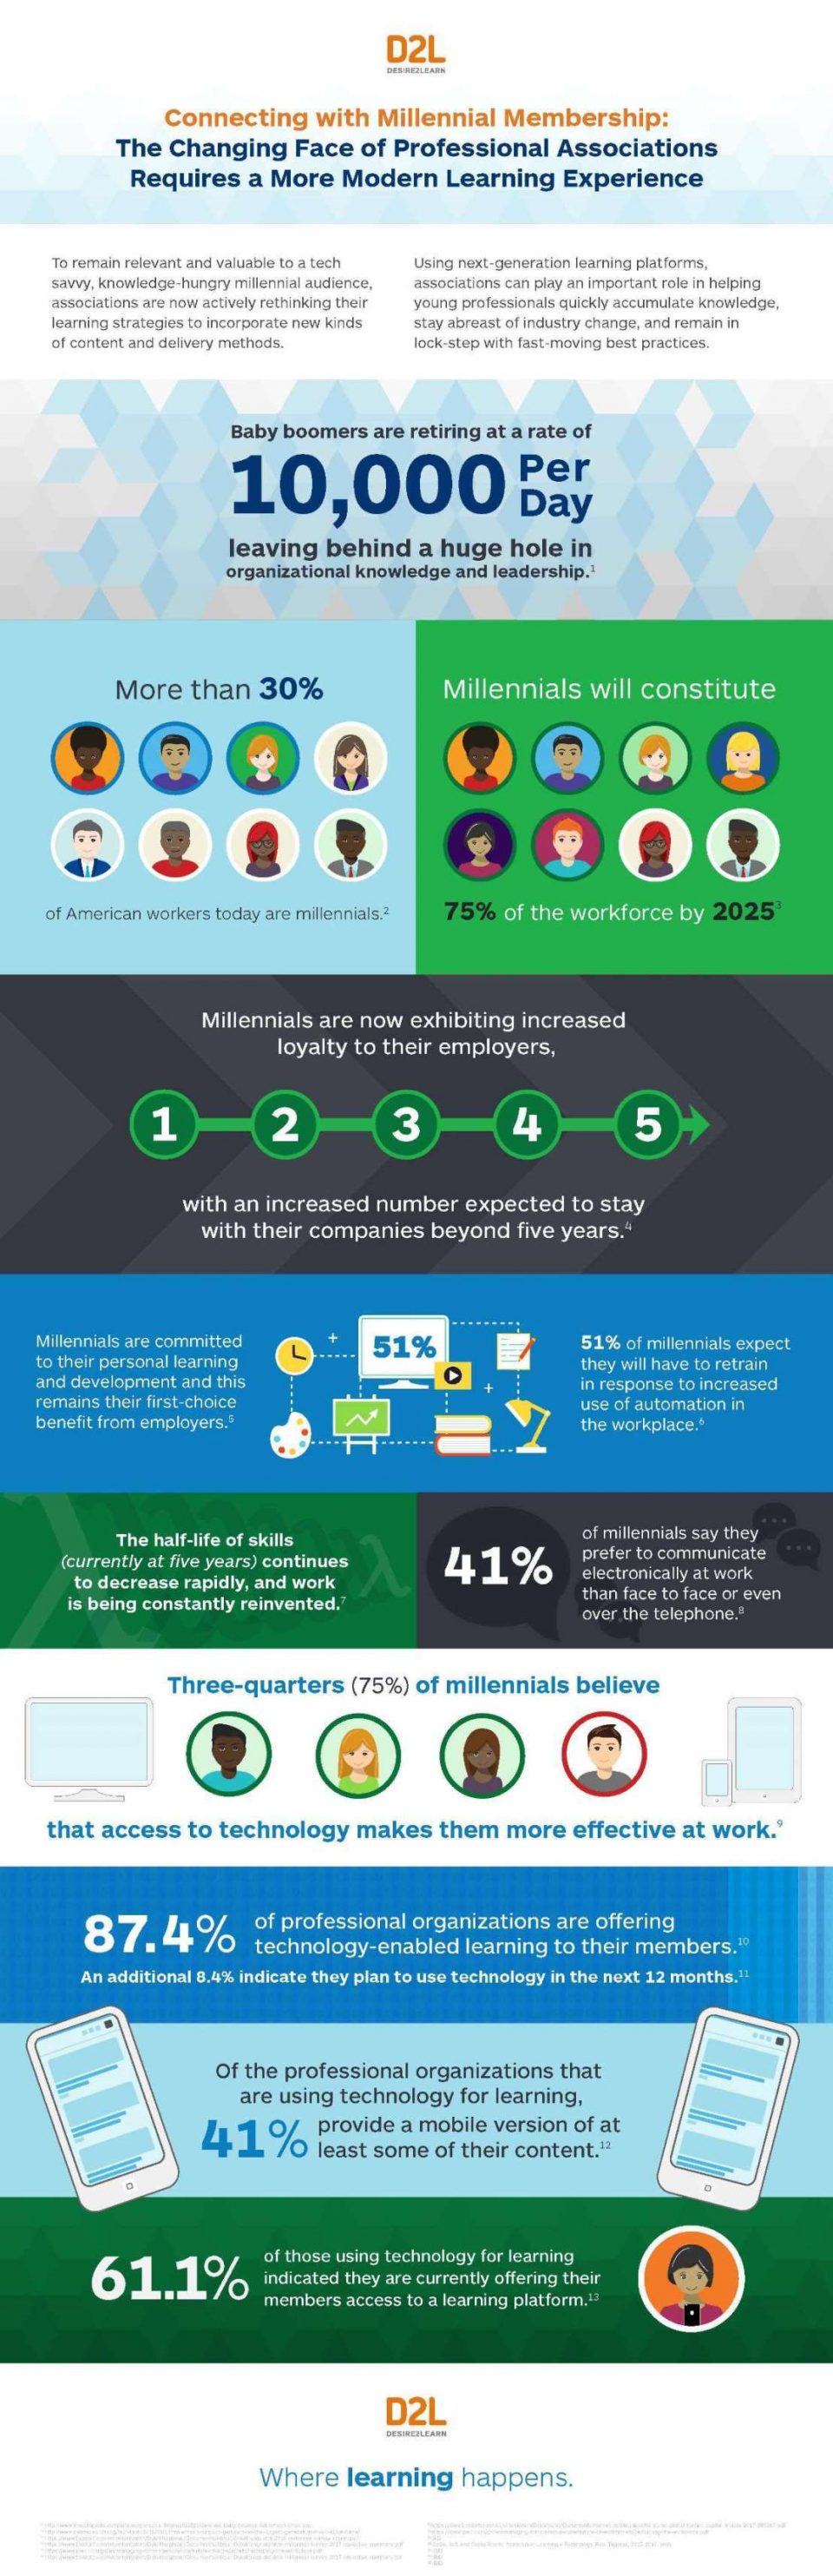 Connecting With Millennial Membership Via A Modern Learning Experience Infographic